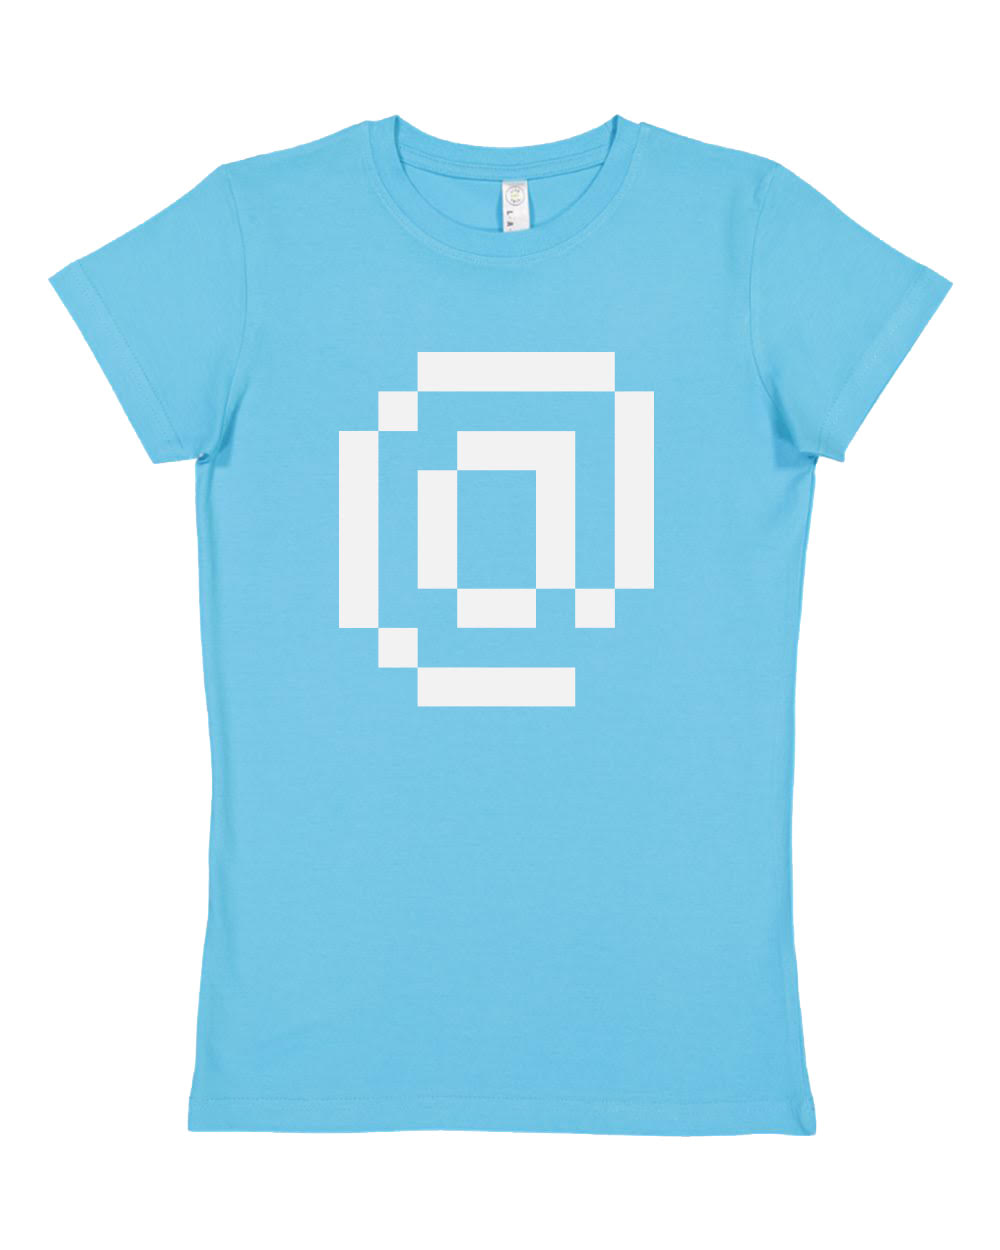 A mockup of a women's cut short-sleeve shirt with a white @ symbol.